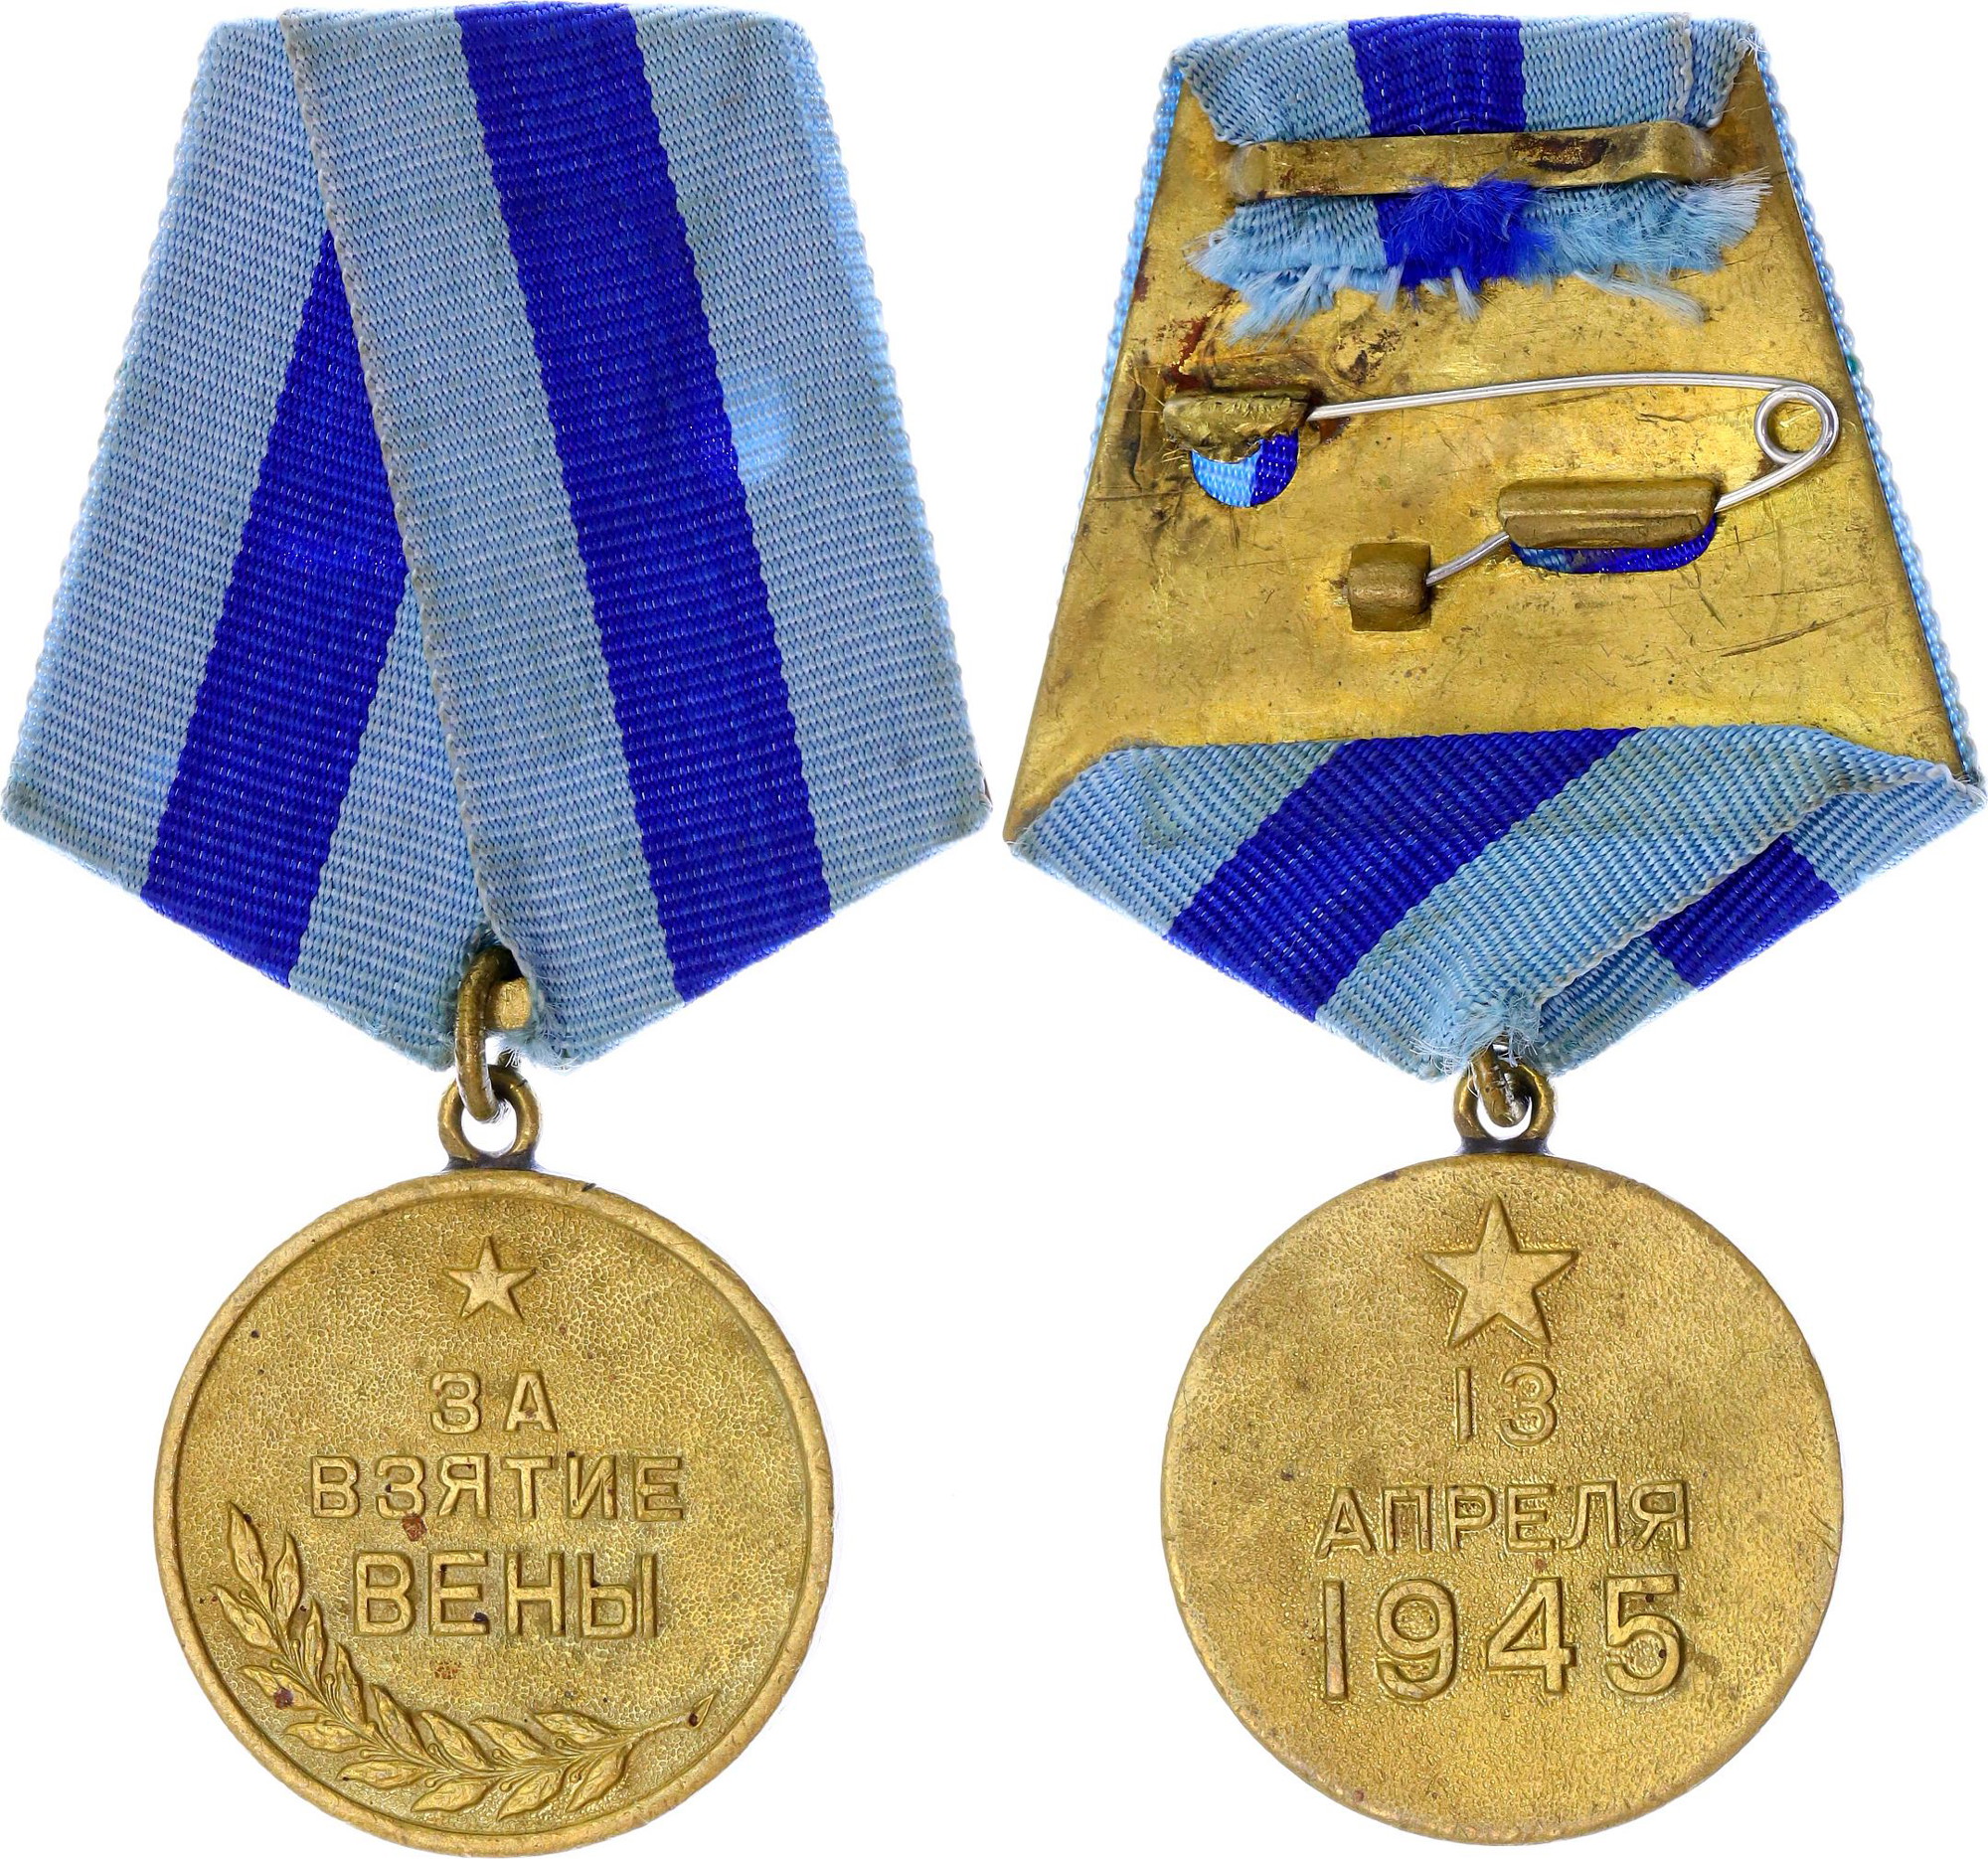 Russia - USSR Medal for Capture of Vienna 1945 | Katz Auction